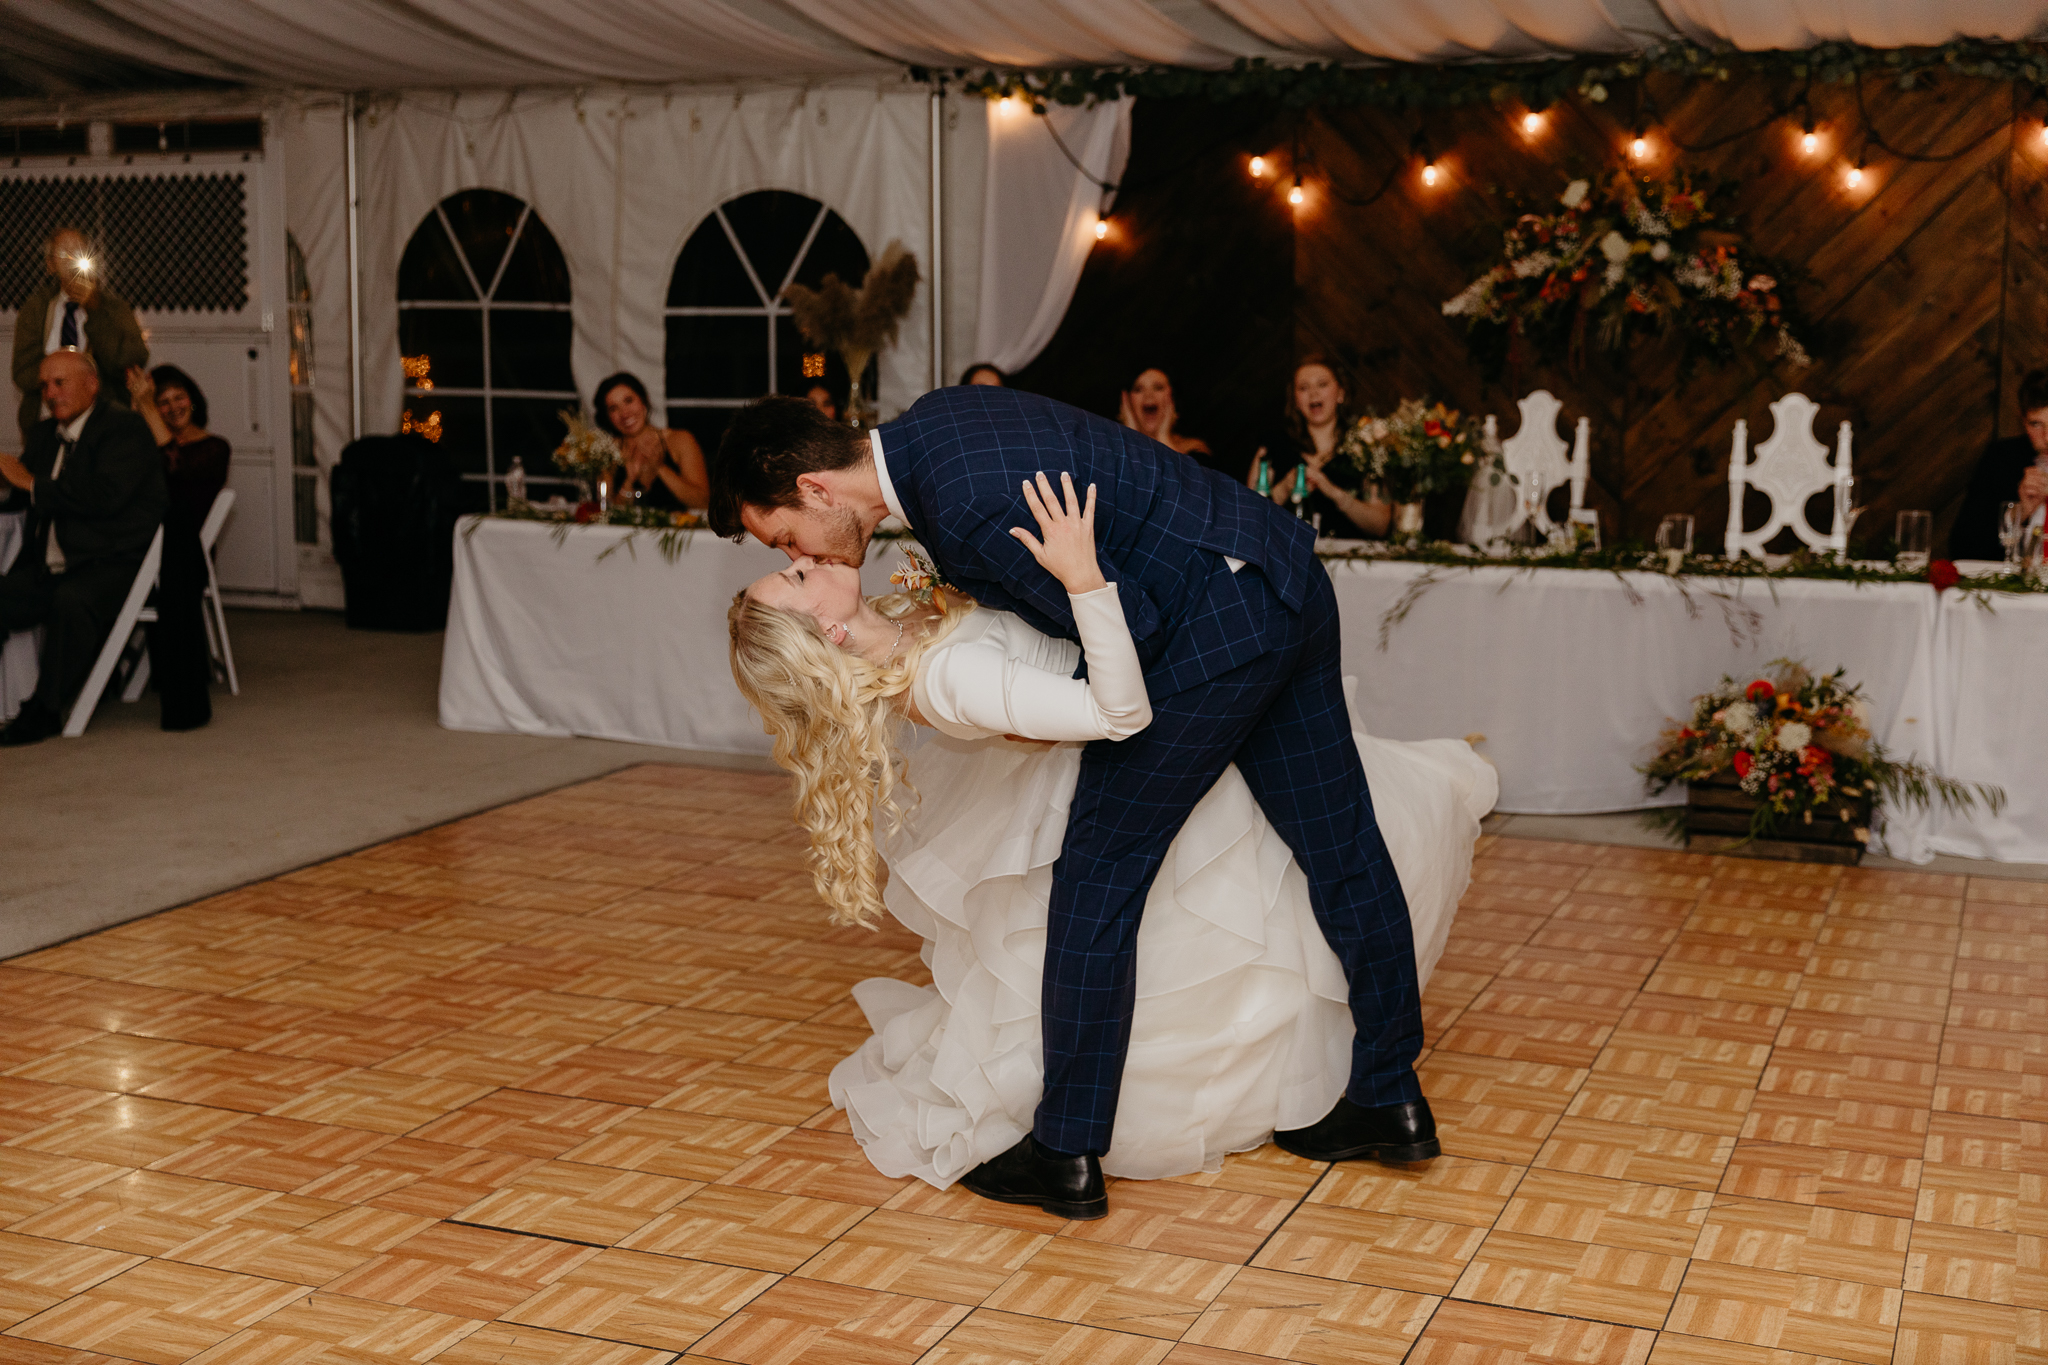 Bride and groom dancing together and kiss during their first dance, in a white tent wedding